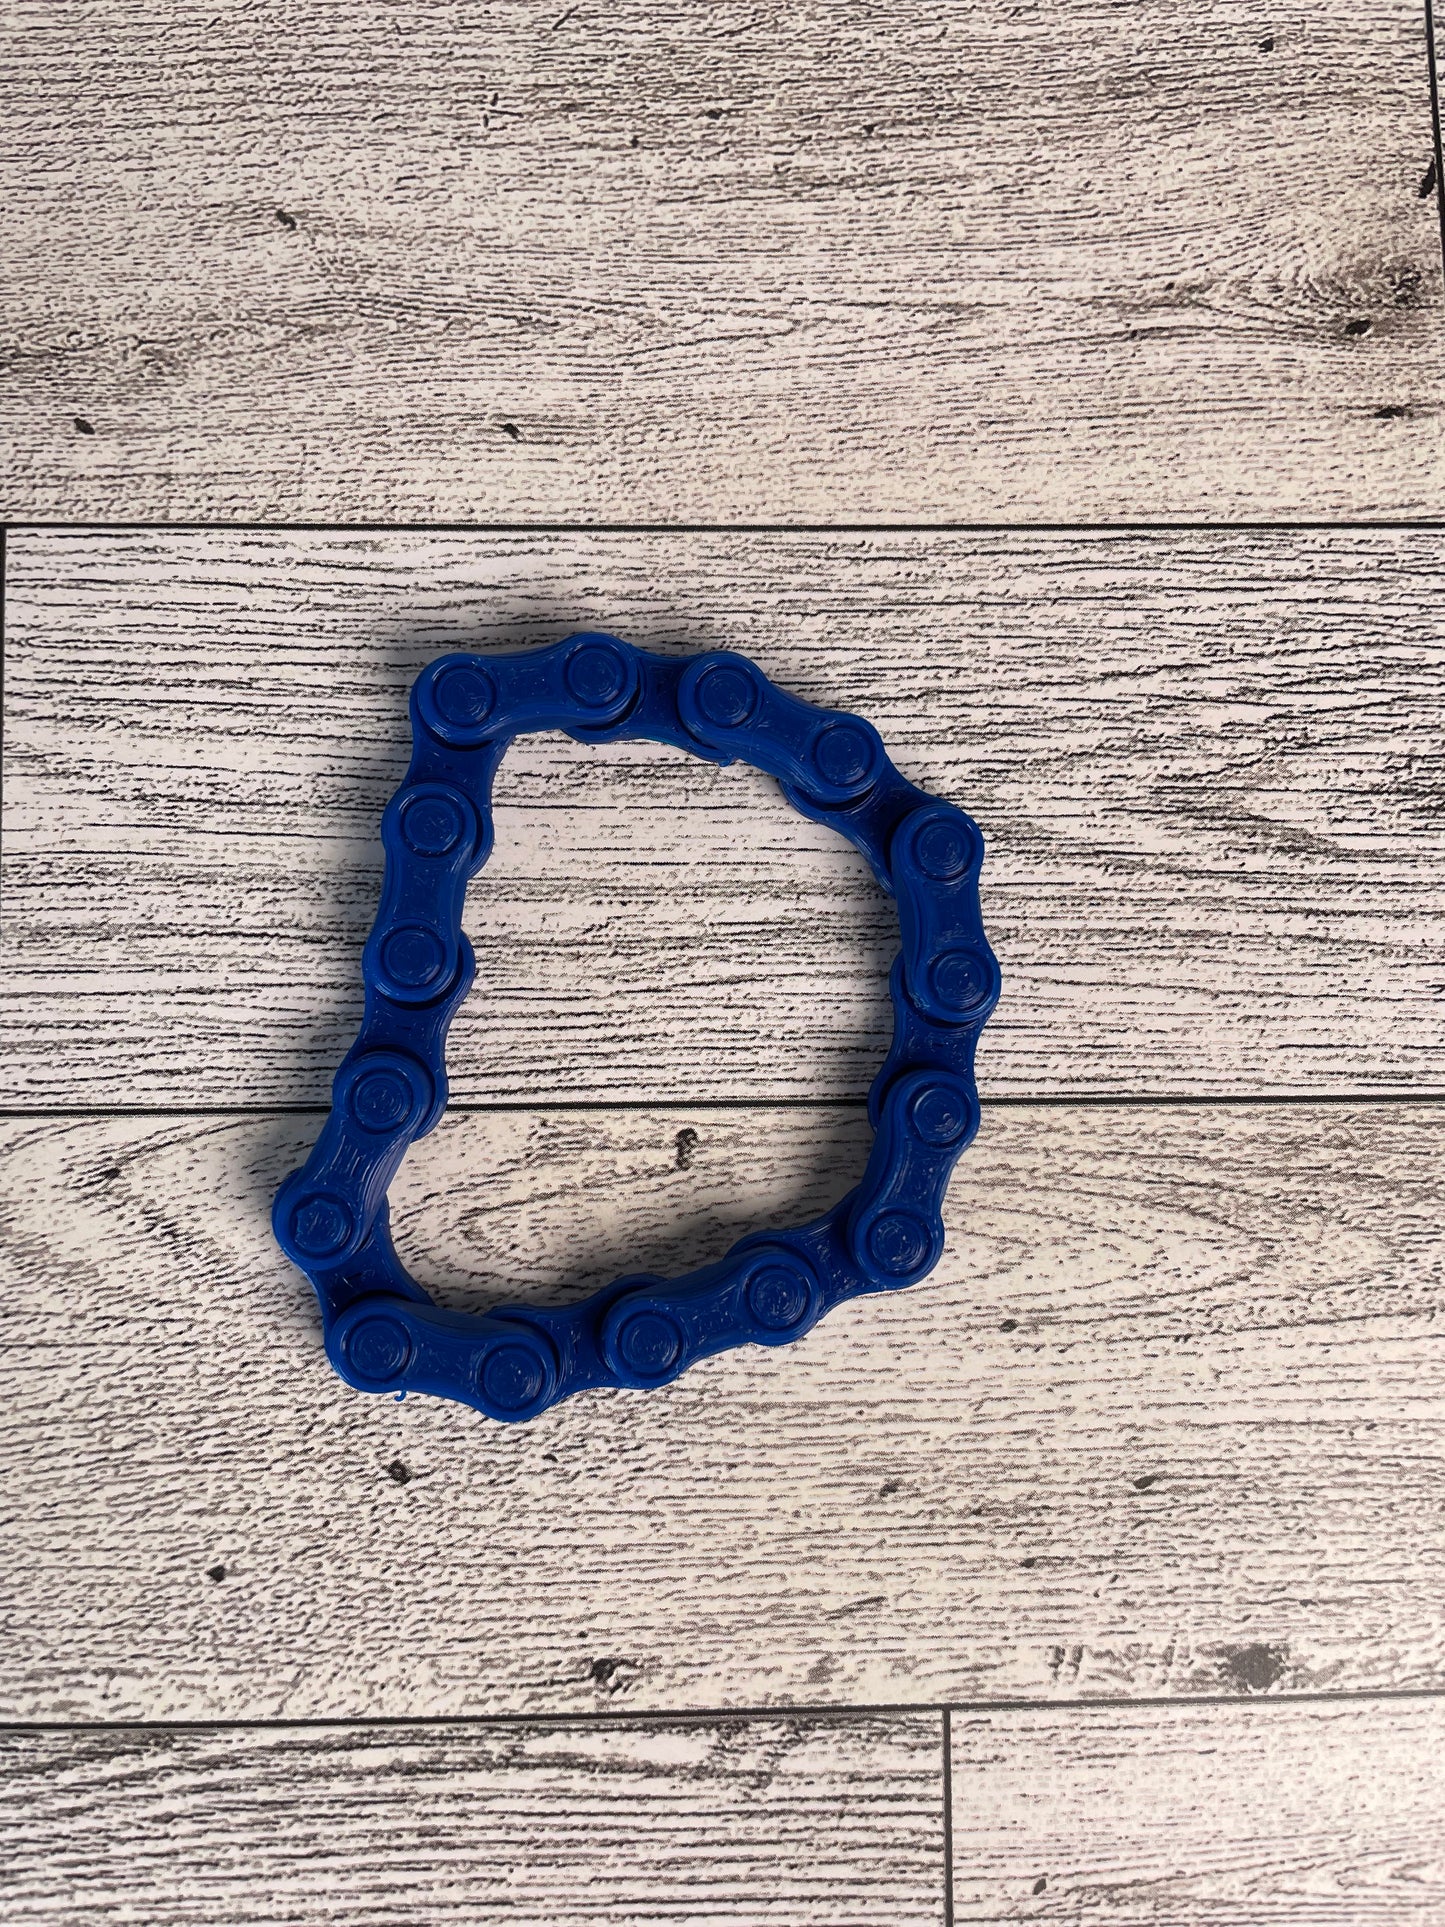 A blue chain link on a wood backdrop. The chain is arranged in a circle shape and there are eight links.